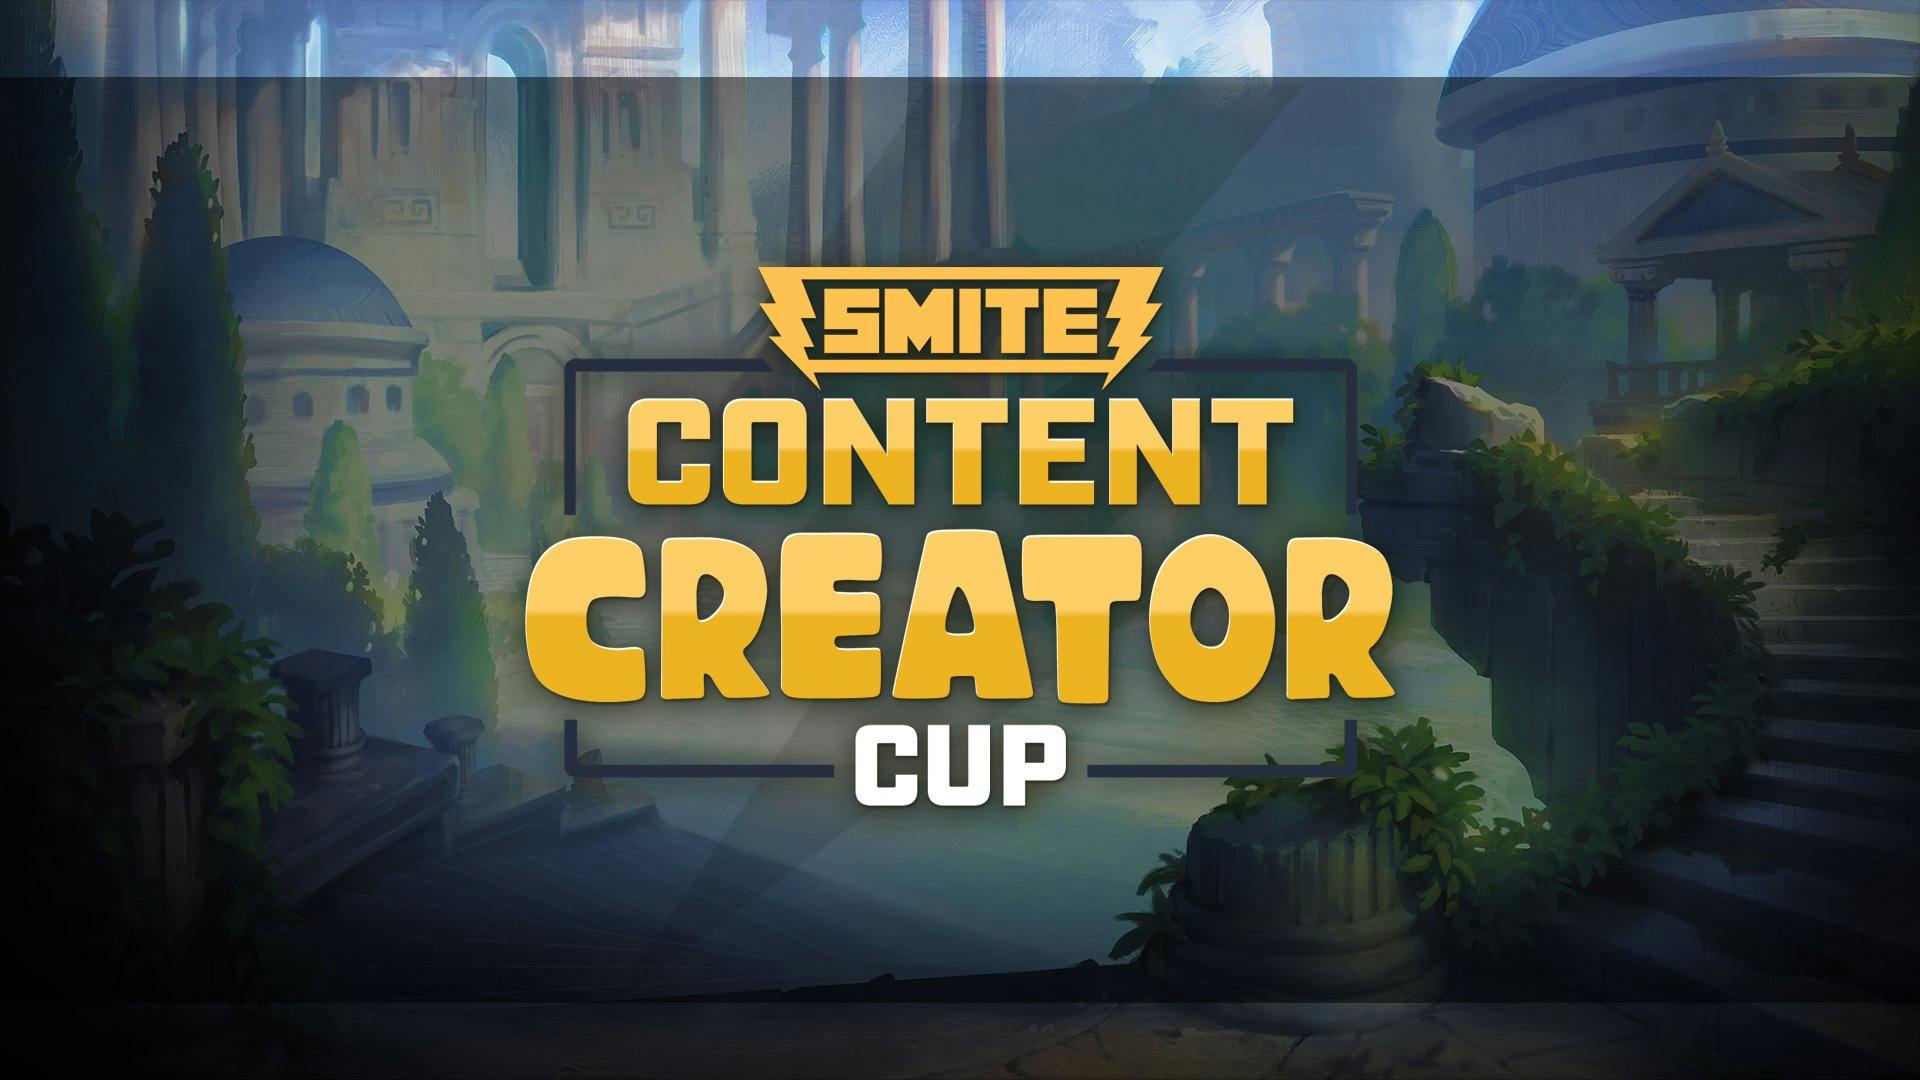 The SMITE Content Creature Cup Returns!